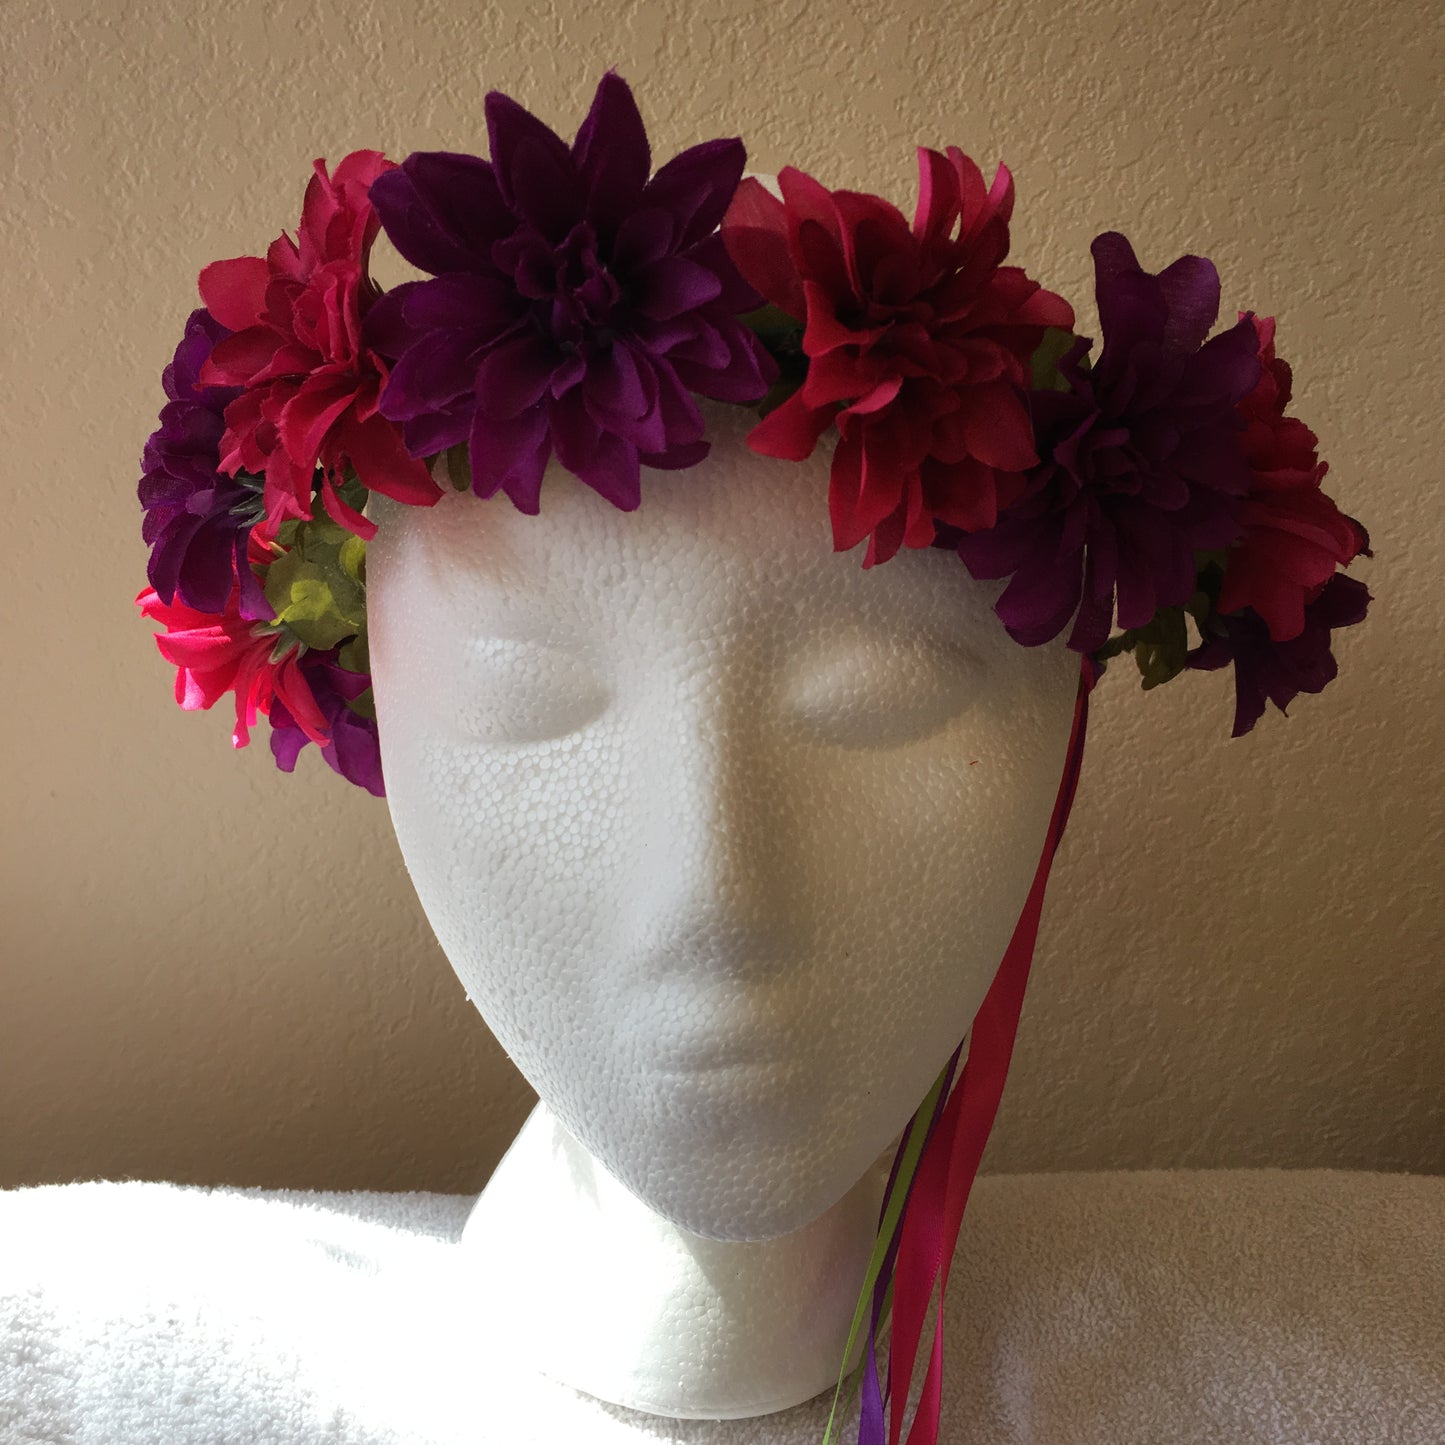 Small Wreath - Hot pink & bright purple flowers